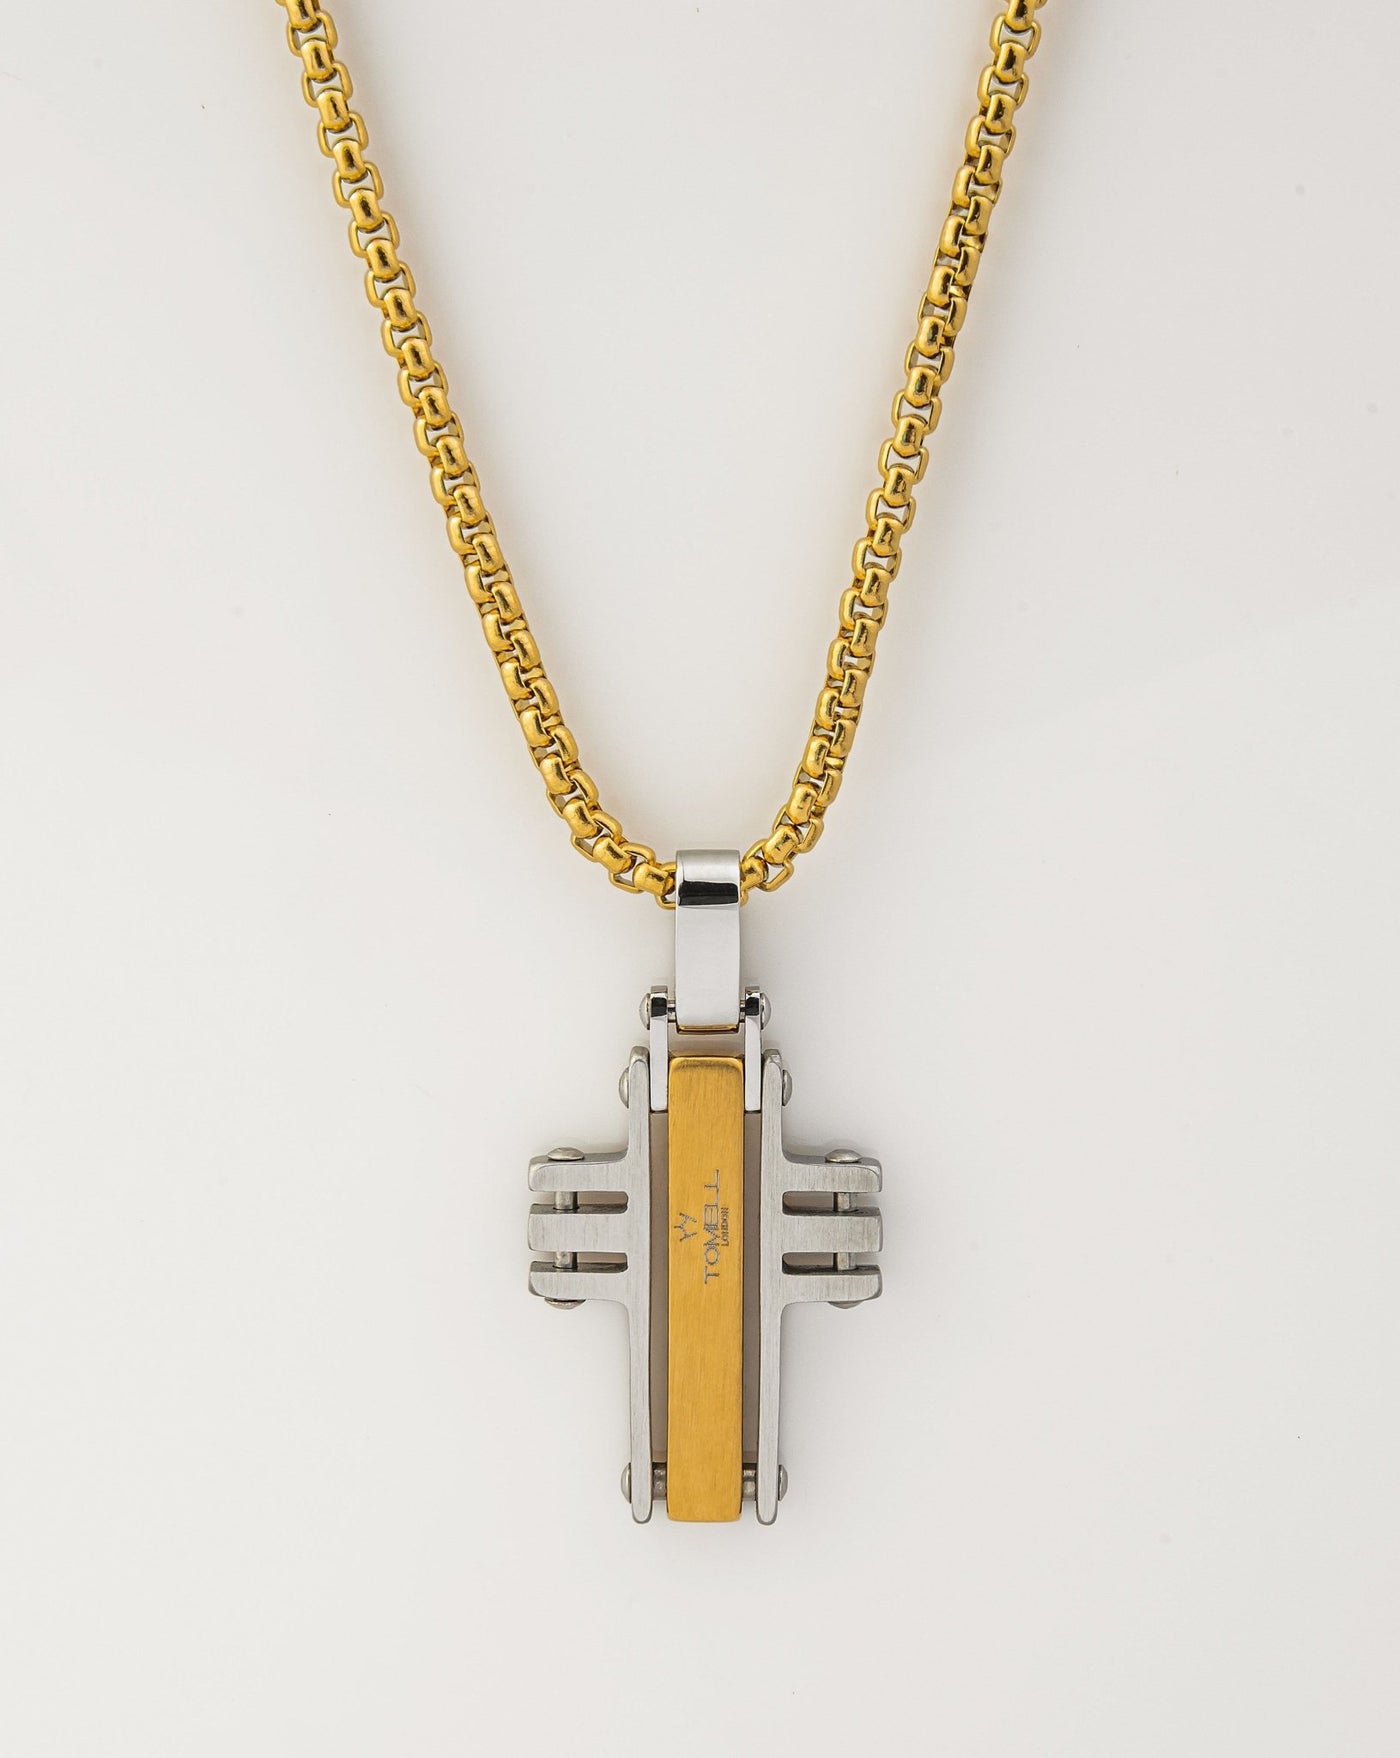 Race Necklace - Tomell London